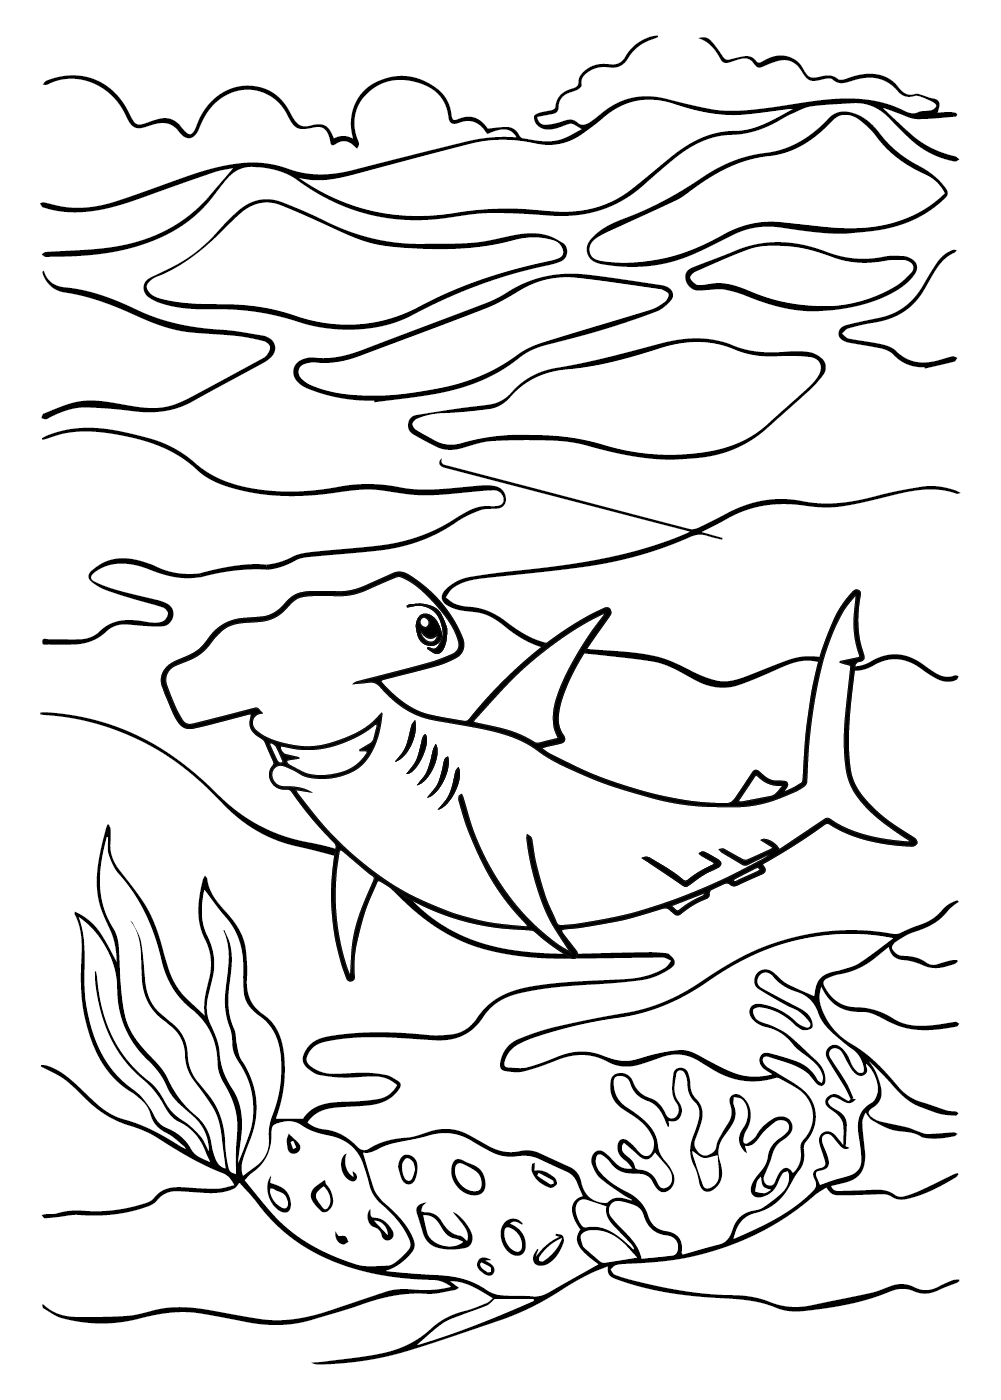 Pictures of Hammerhead Sharks Coloring Pages